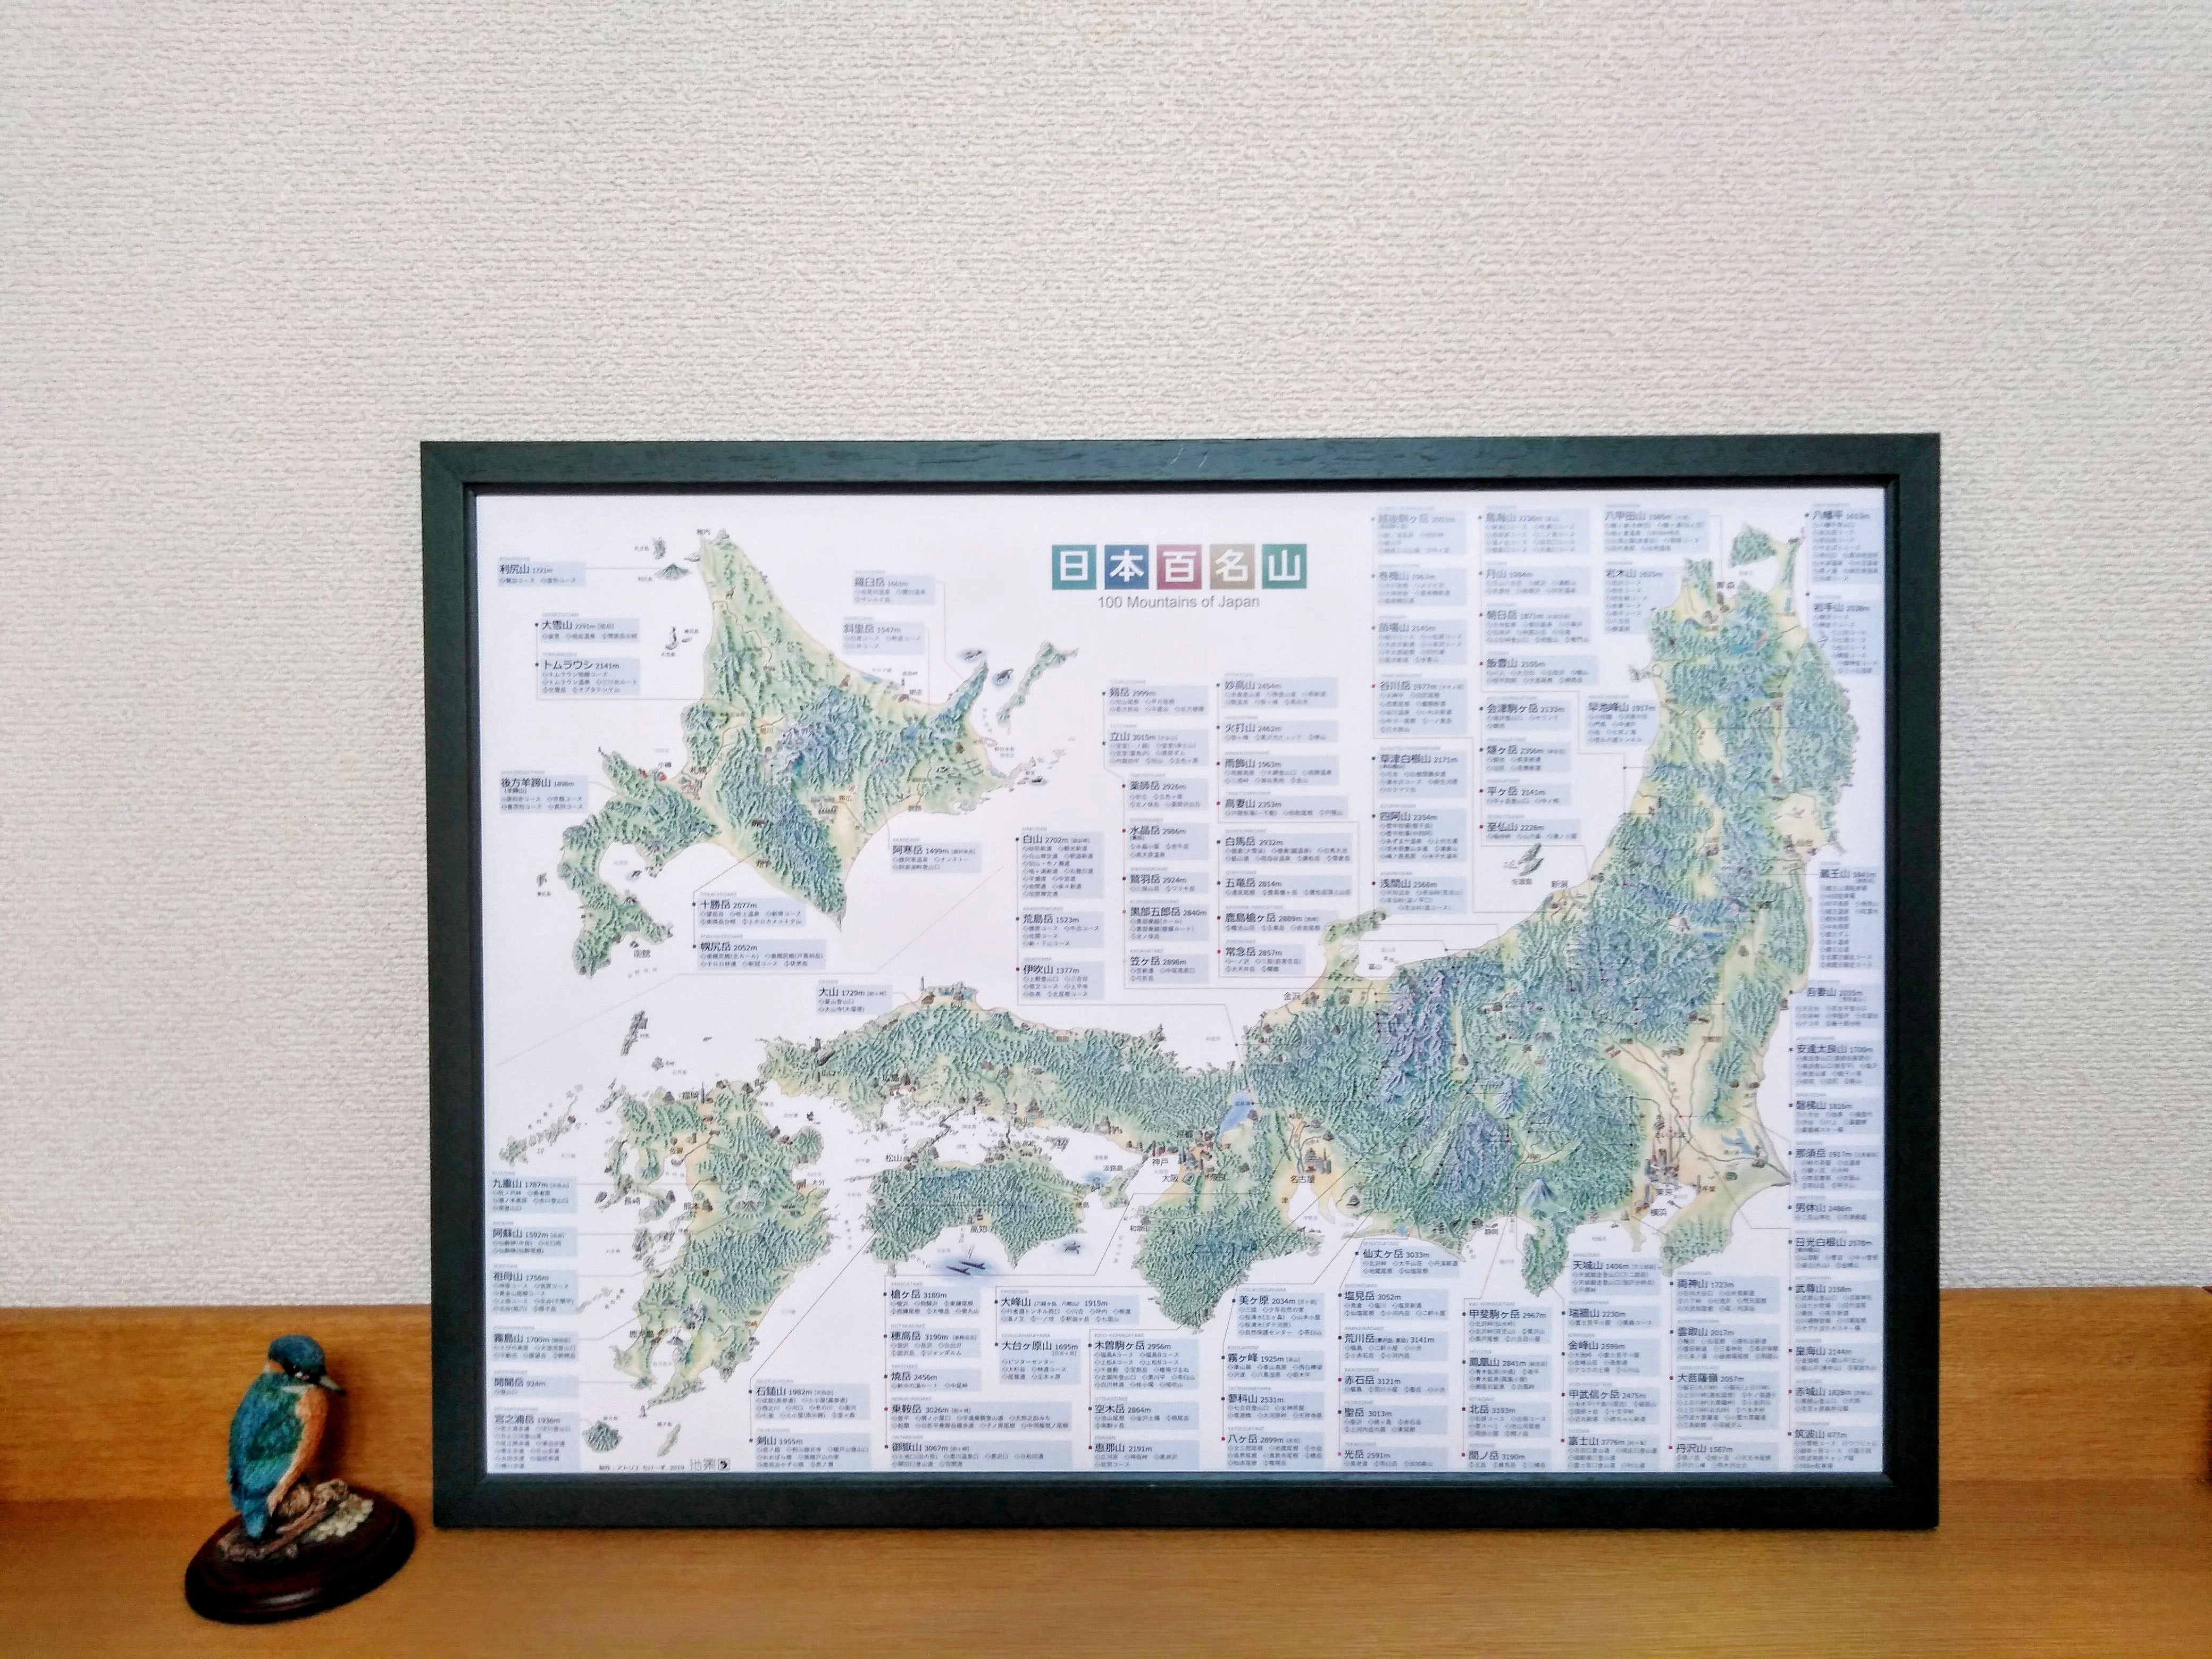 Maps Of 100 Mountains アトリエ ちけーず 地景図